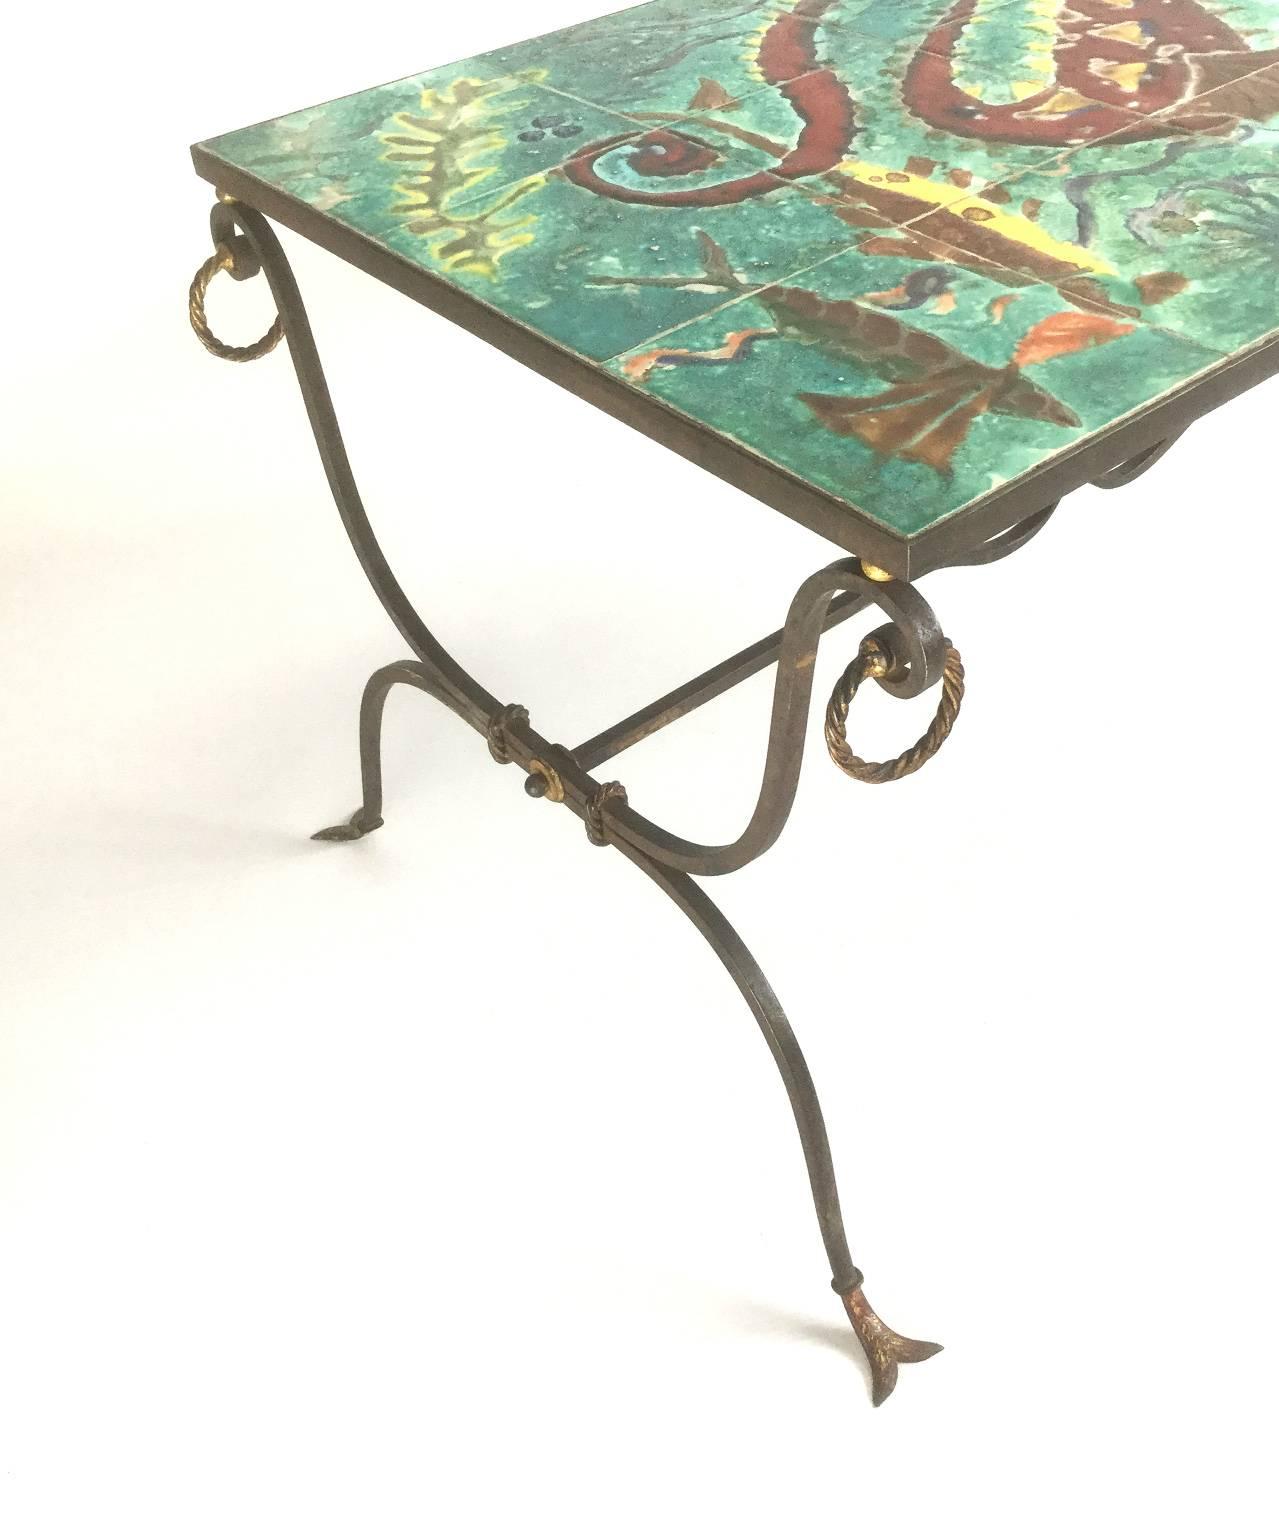 Unique French wrought iron coffee table with original tiles representing a seahorse and a seabed
This wrought iron base is a fine work, close to the French master of wrought iron technique Gilbert Poillerat 1902-1988
Delicate finish with fishtail